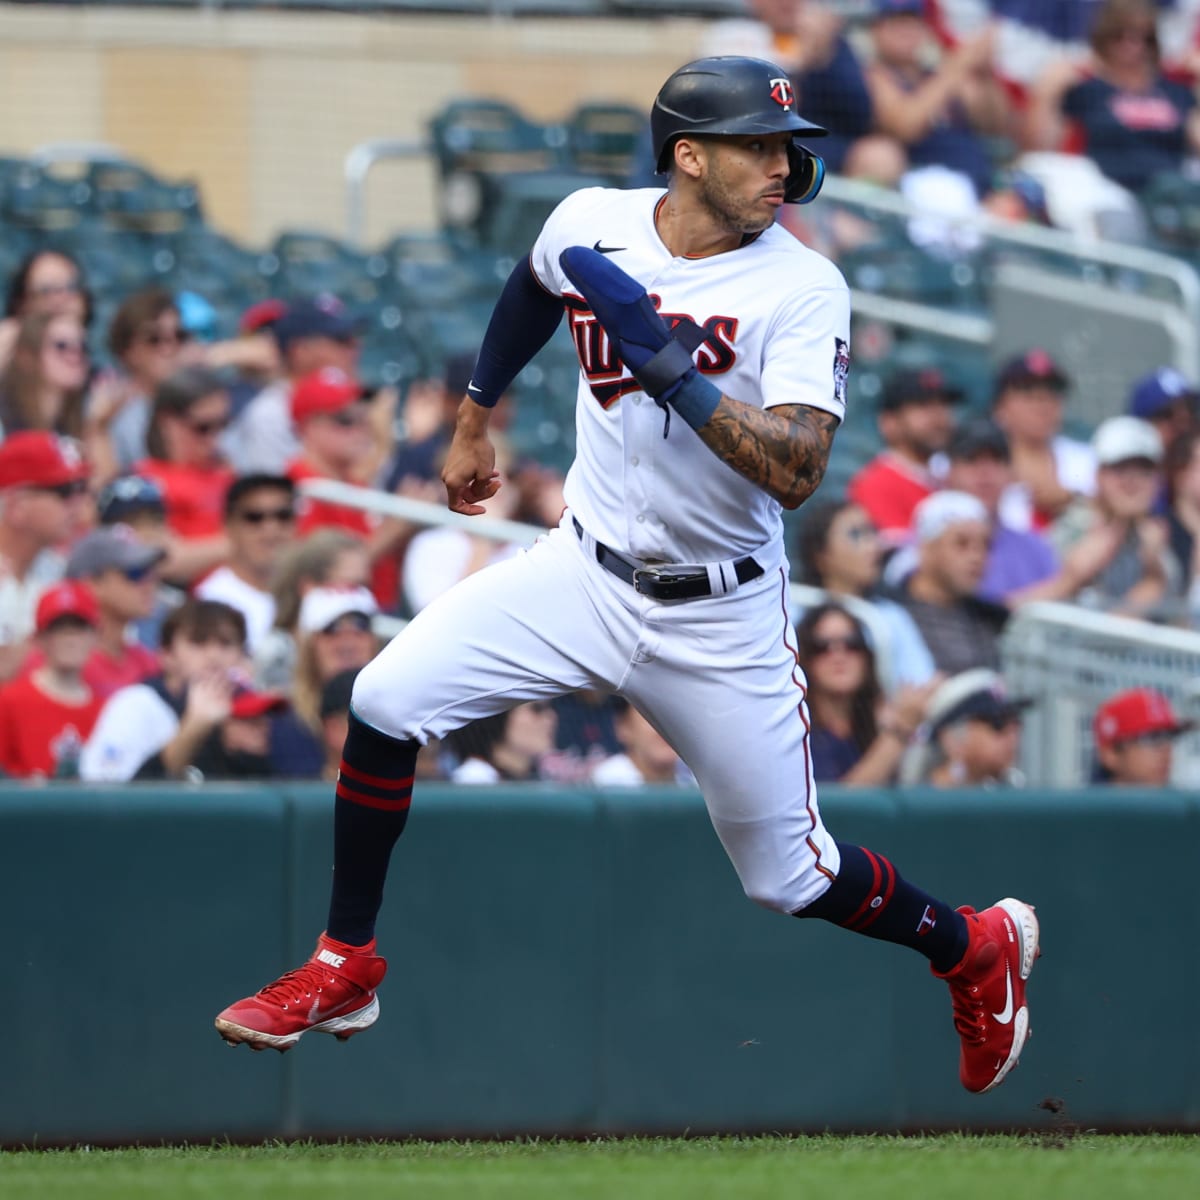 CHGO Cubs Podcast: Carlos Correa is headed back to the Twins - CHGO